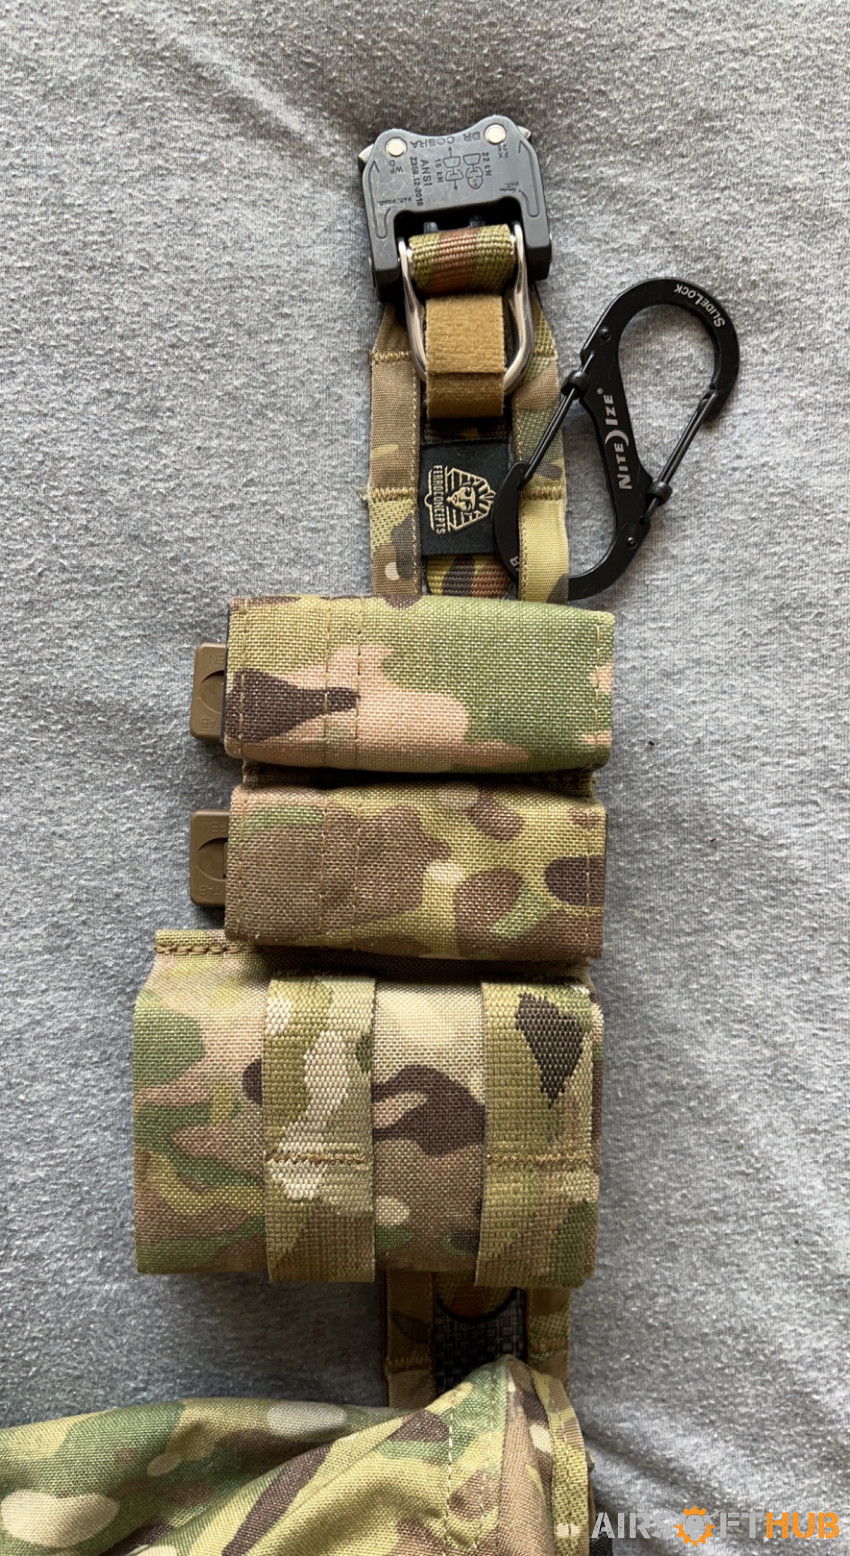 Ferro Concepts The Bison Belt - Used airsoft equipment